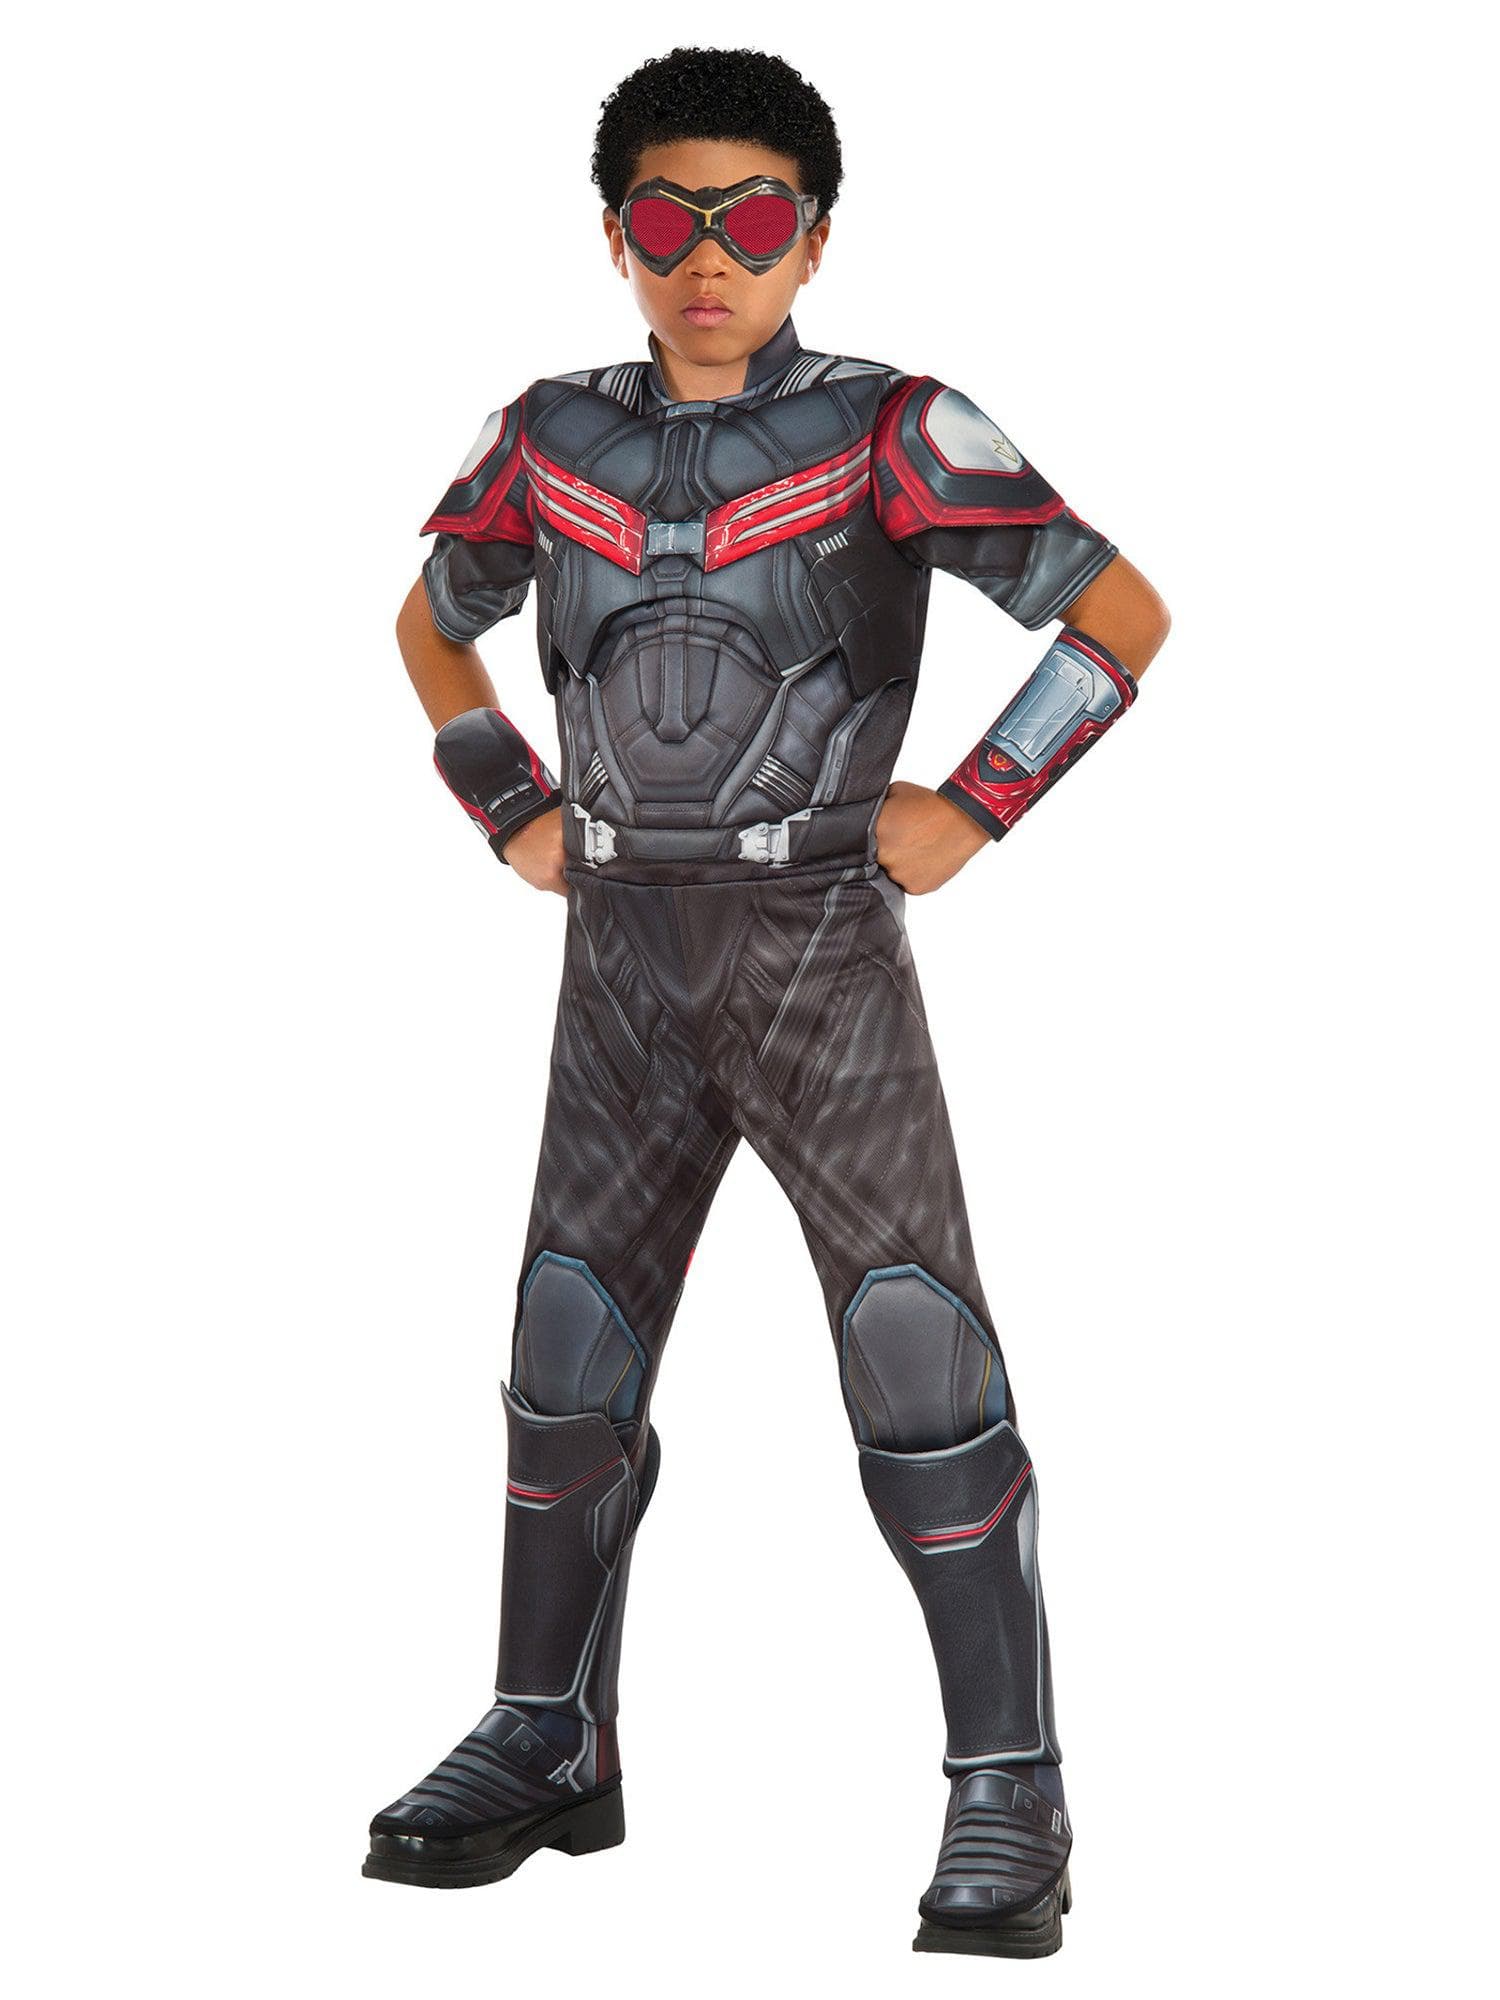 Marvel's Captain America: Civil War - Deluxe Muscle Chest Falcon Costume for Kids - costumes.com